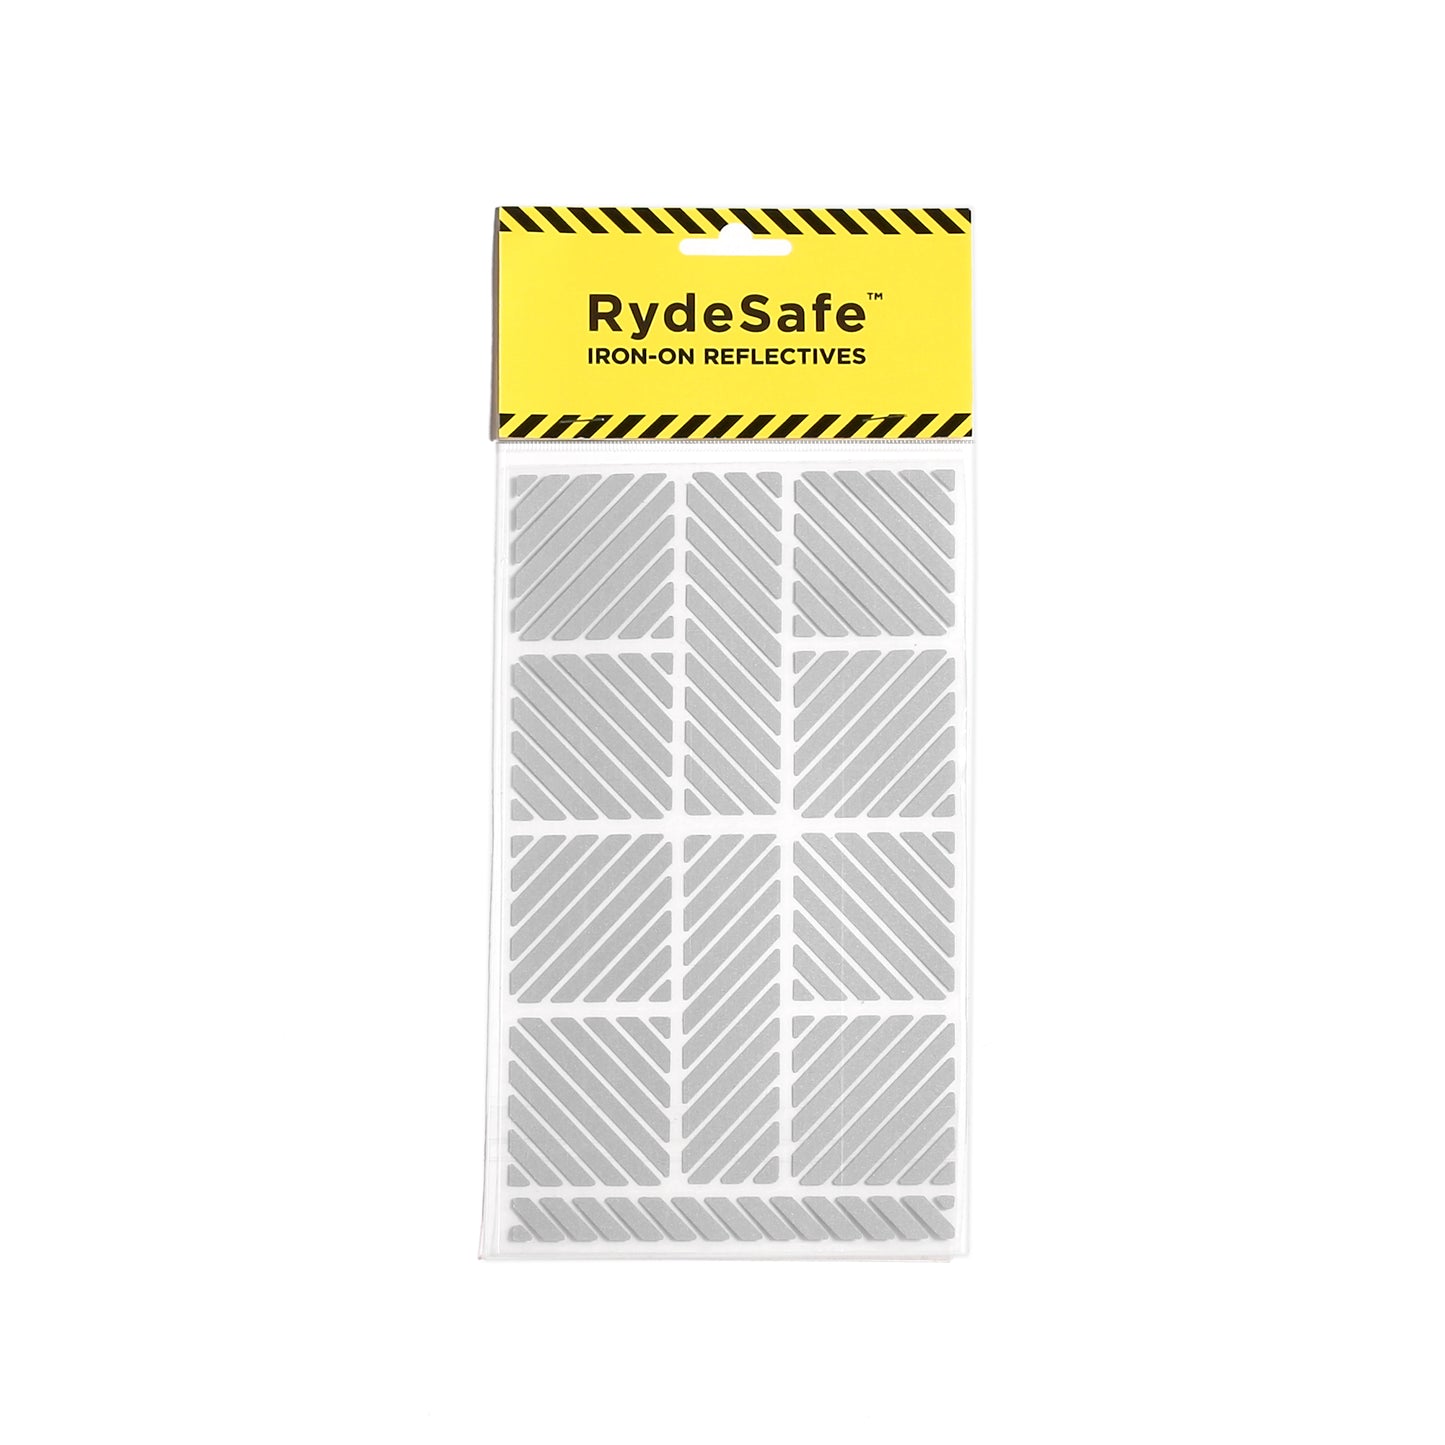 RydeSafe Iron-On Reflectives - LARGE - Stripes - Made with 3M Heat-App